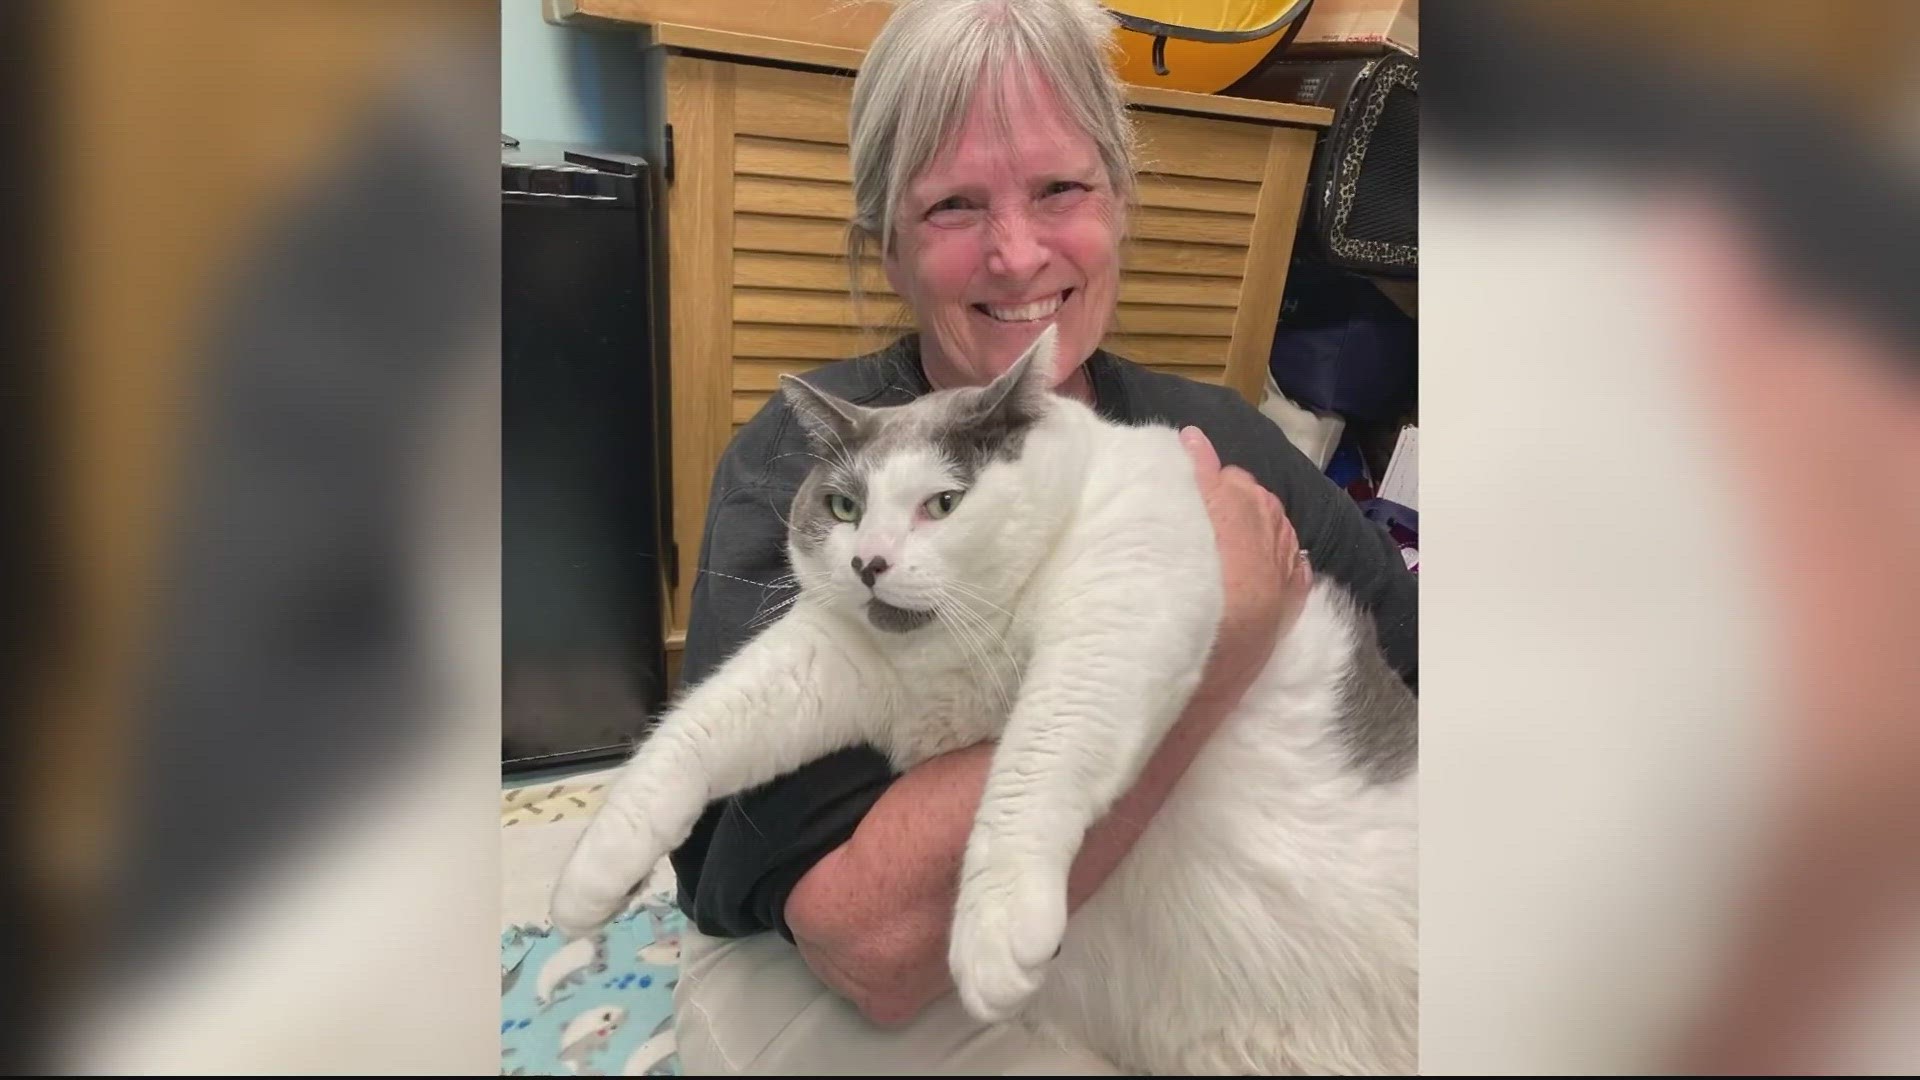 He's just as heavy as he looks. But this cat in Virginia is on his way from the shelter to his new forever home.